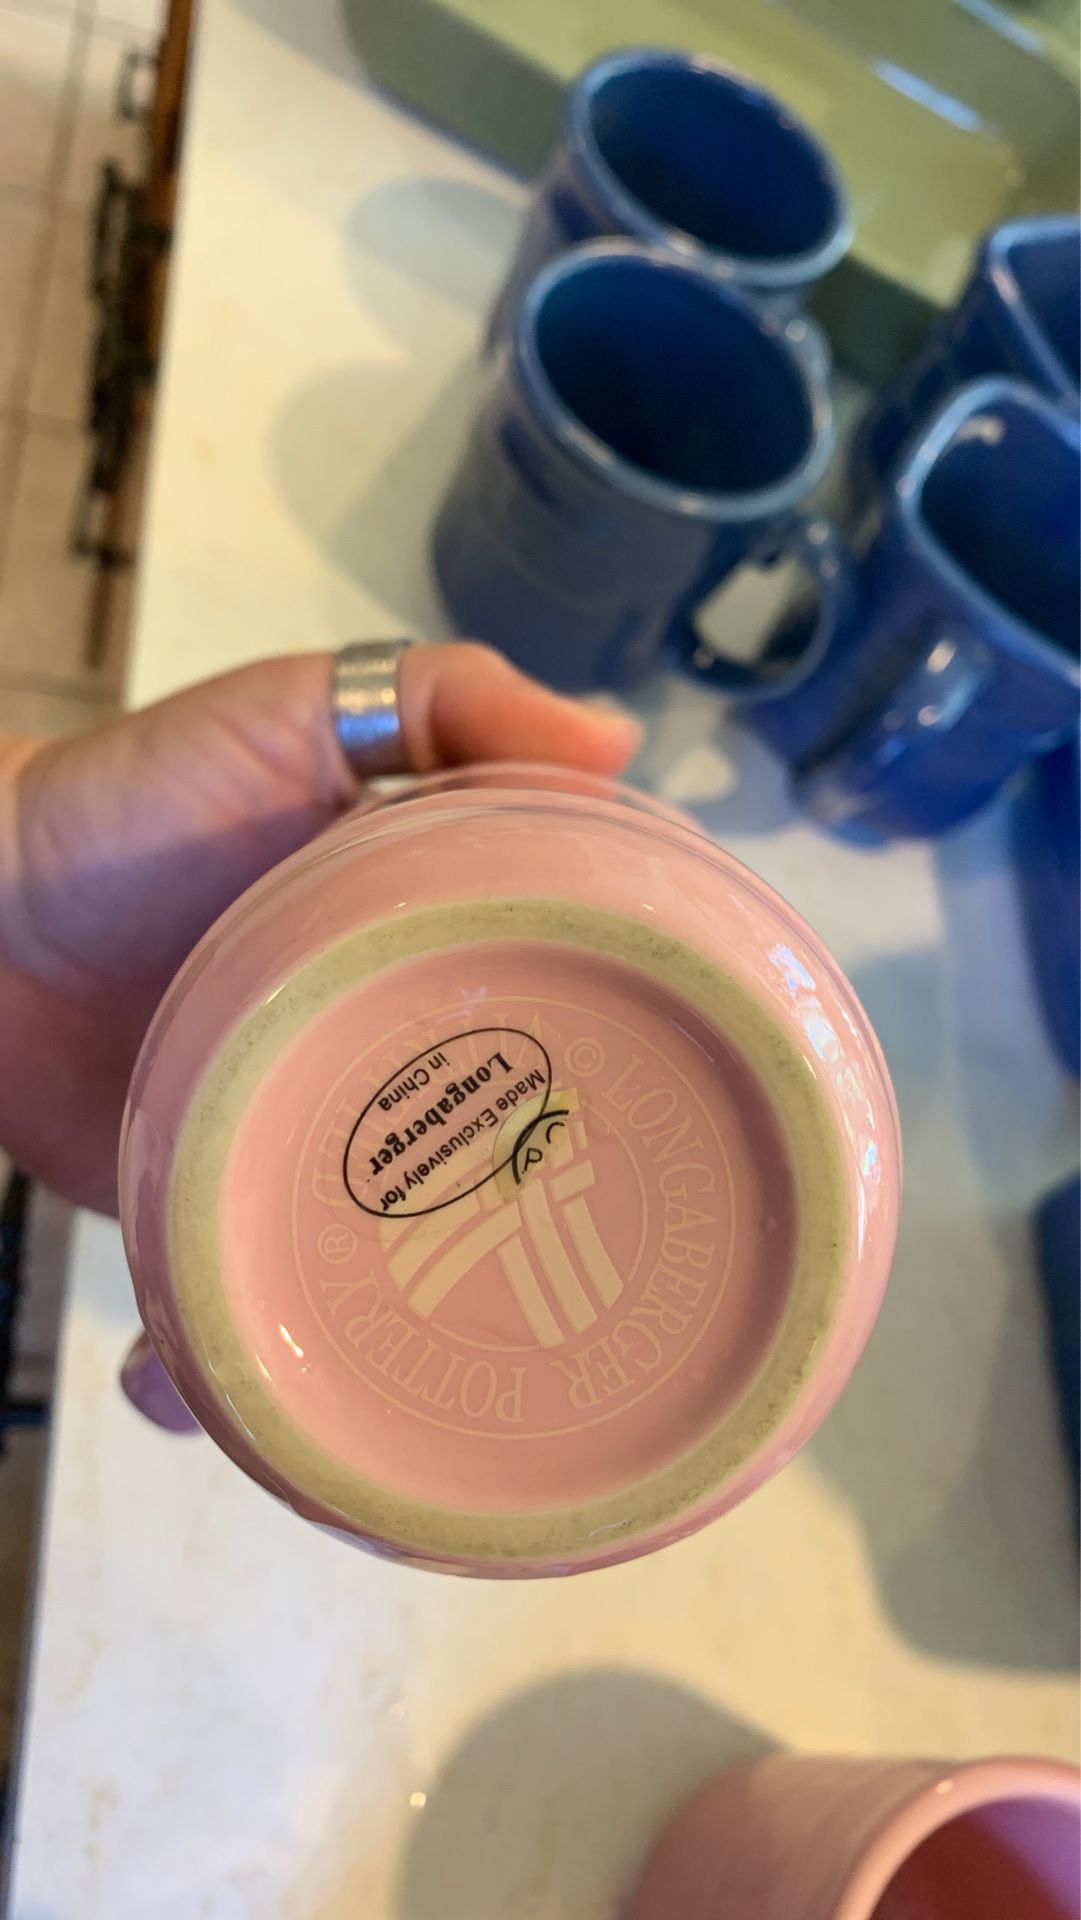 Longaberger Breast Cancer Tall Coffee Mugs Cups